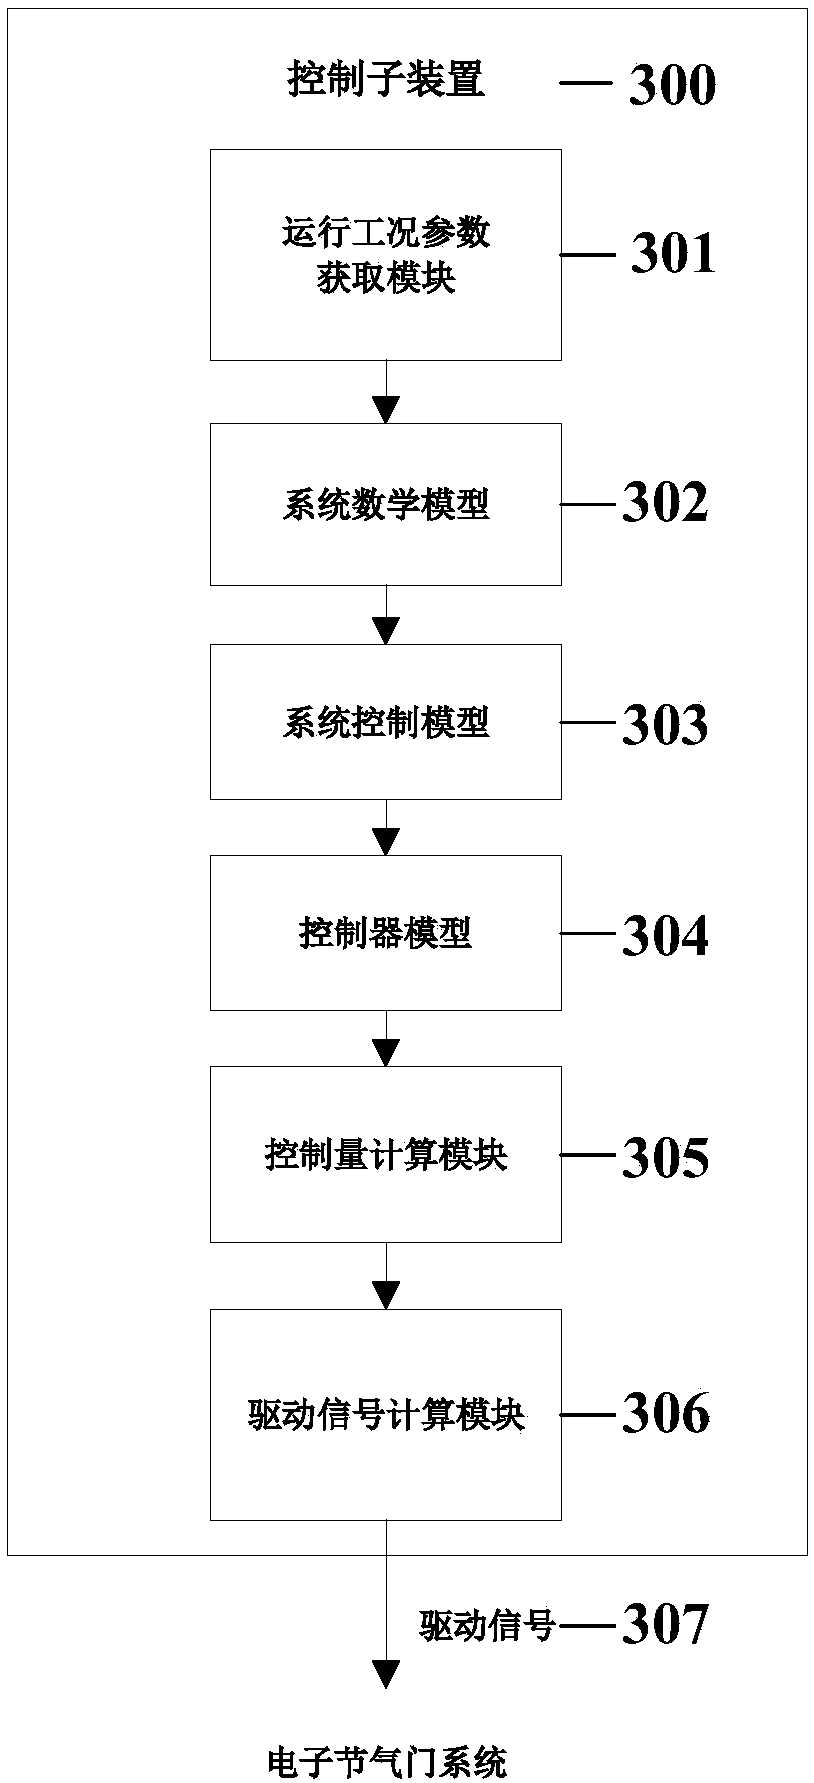 Nonlinear anti-interference control method and device for electronic throttle system